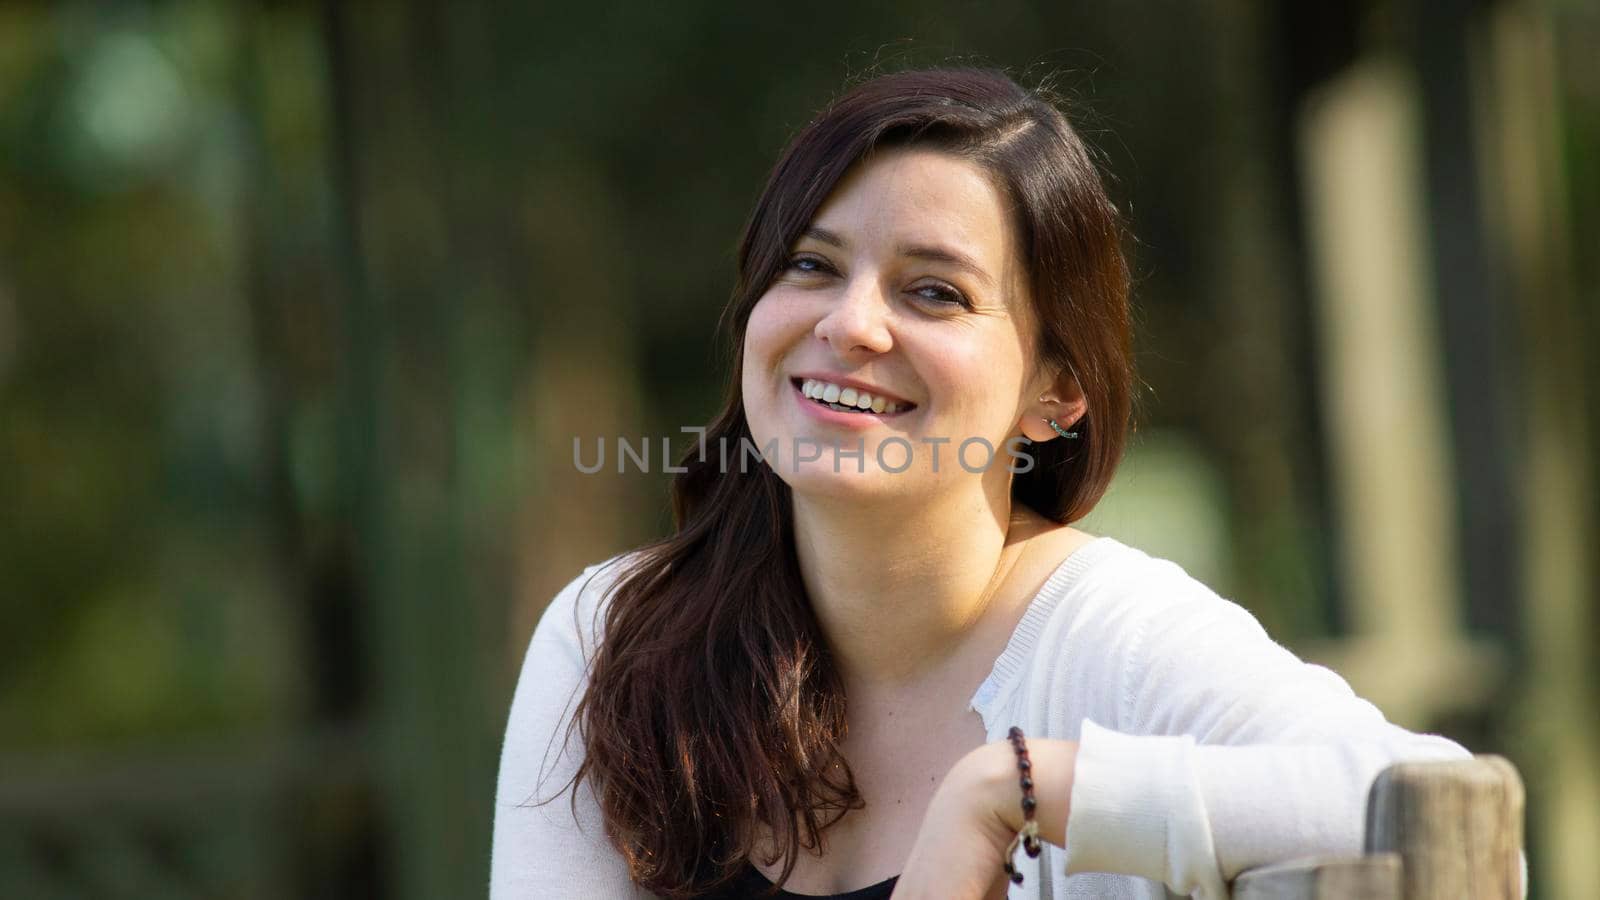 Portrait of a beautiful young Hispanic woman in the middle of a park with a very cheerful attitude against a background of unfocused green trees by alejomiranda